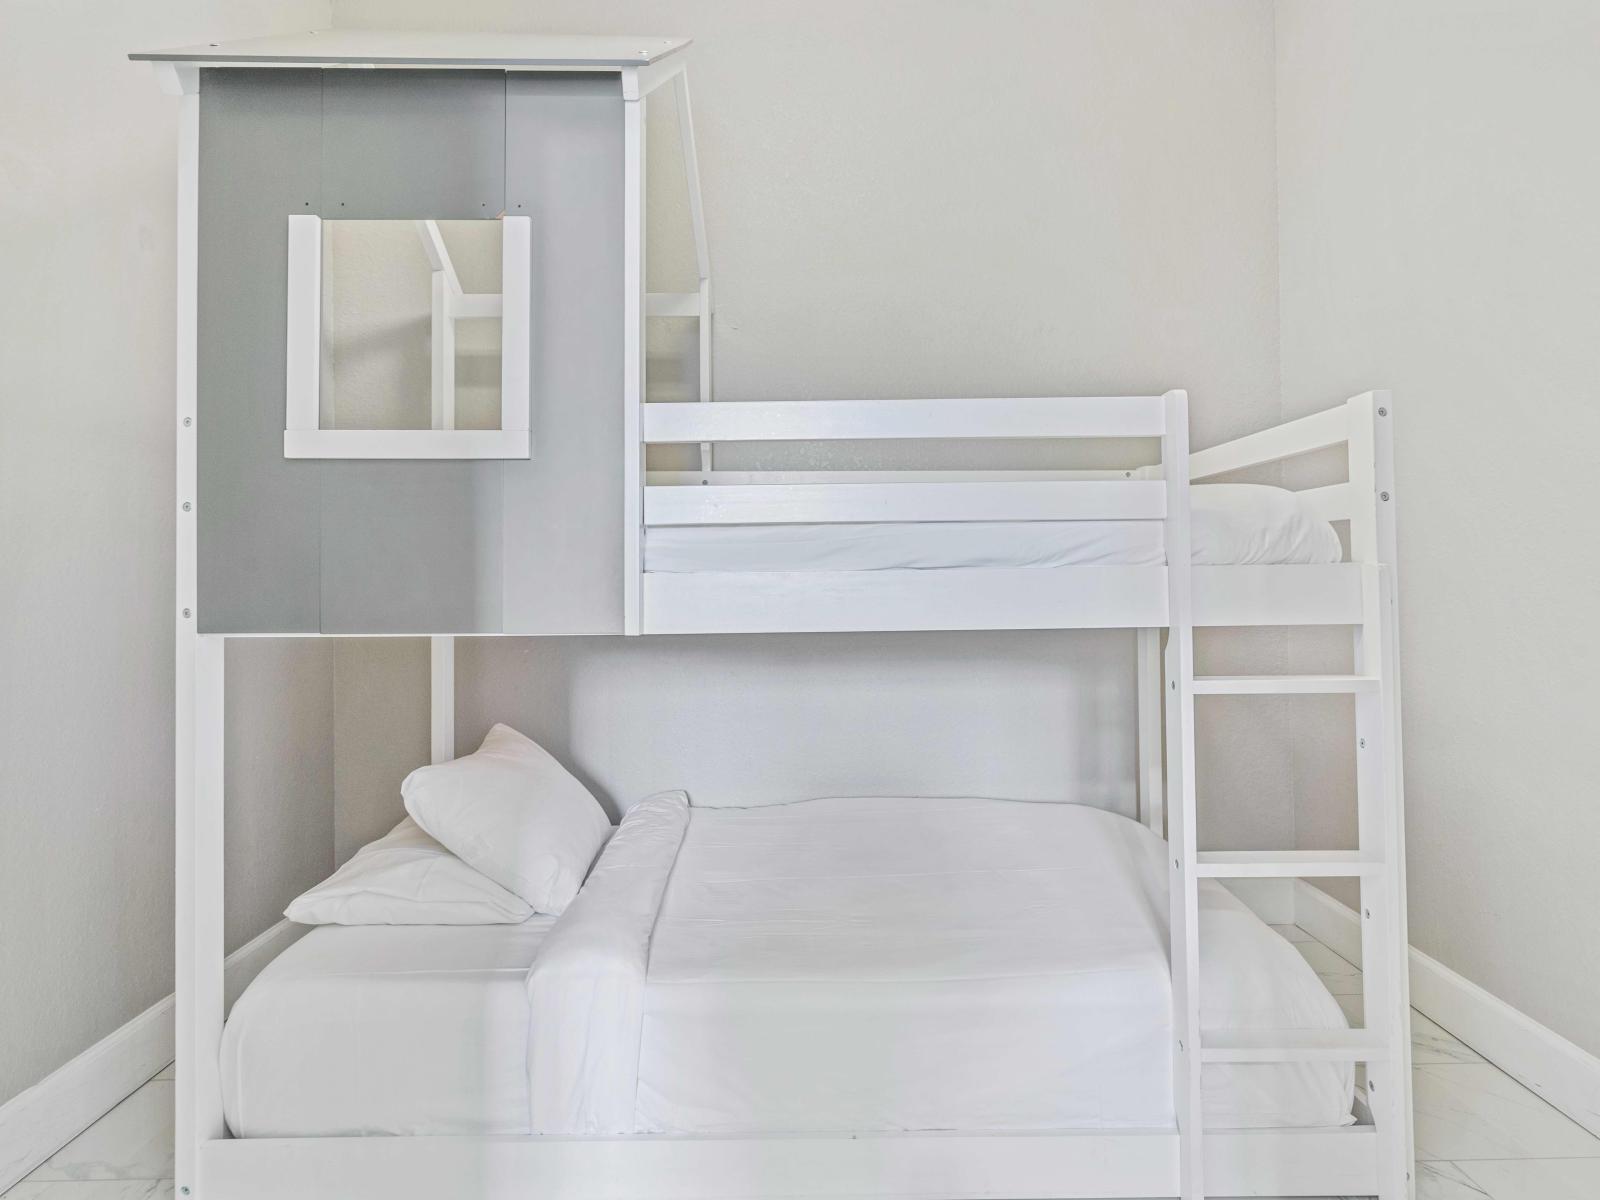 The large closet in bedroom 3 contains a bunk bed with 2 additional single beds, perfect for kids.